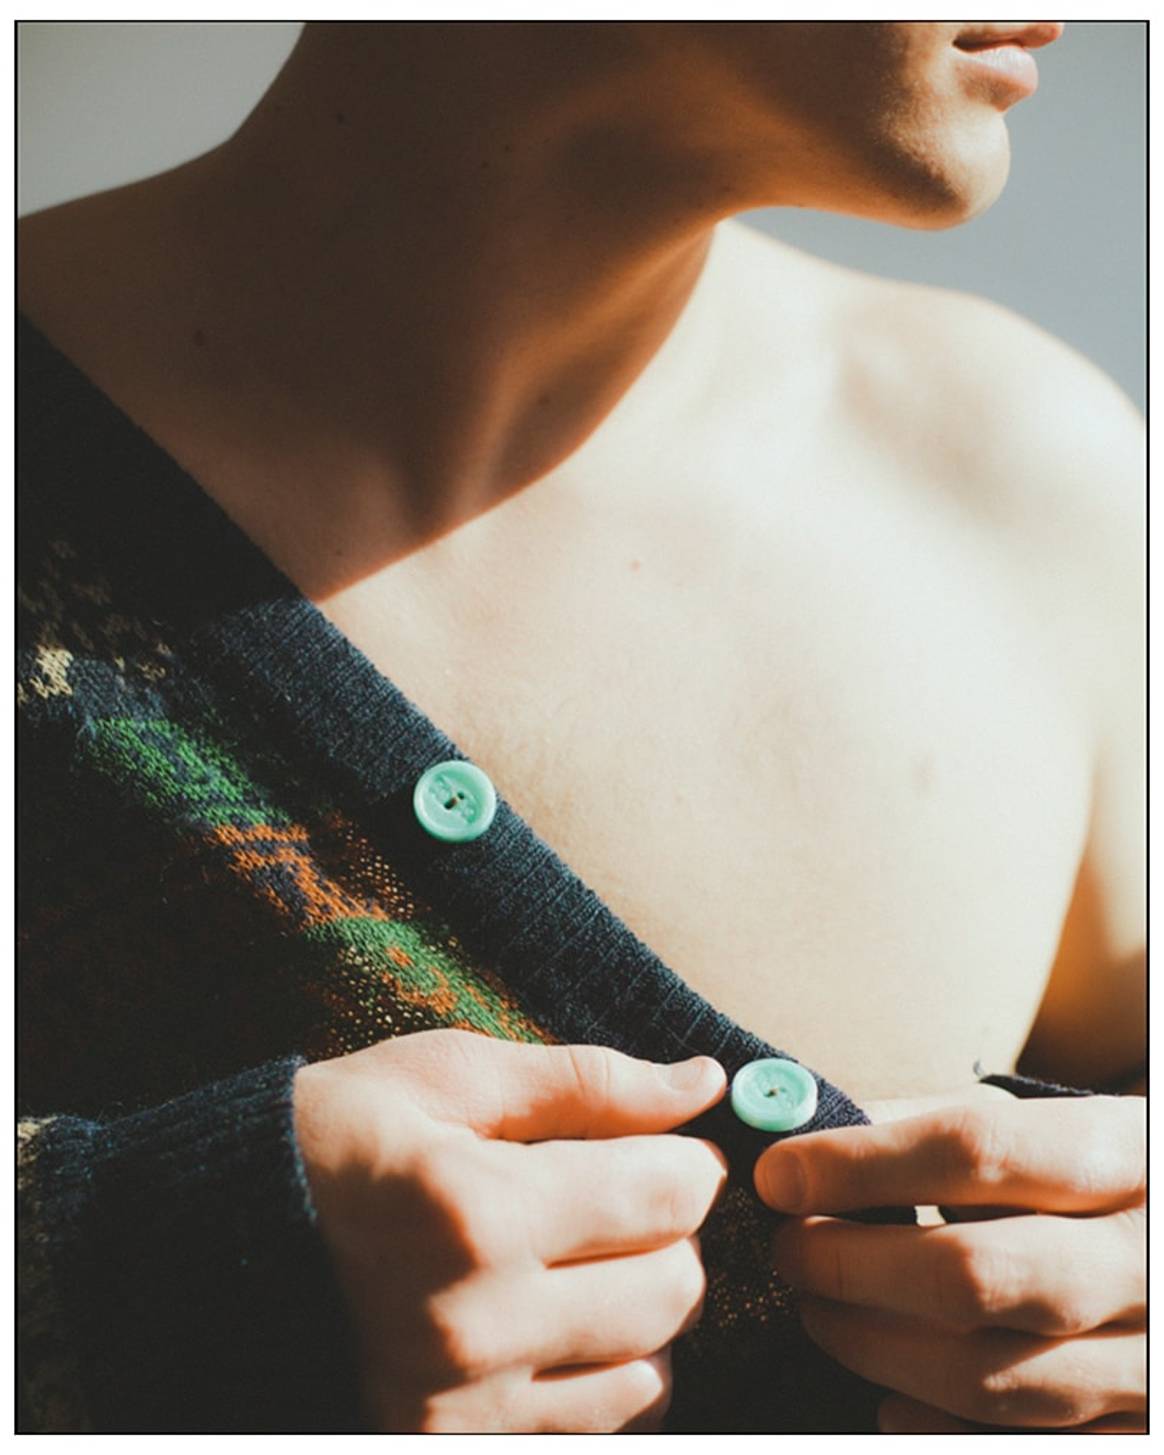 Benthos Buttons: The most sustainable and ethical garment button available